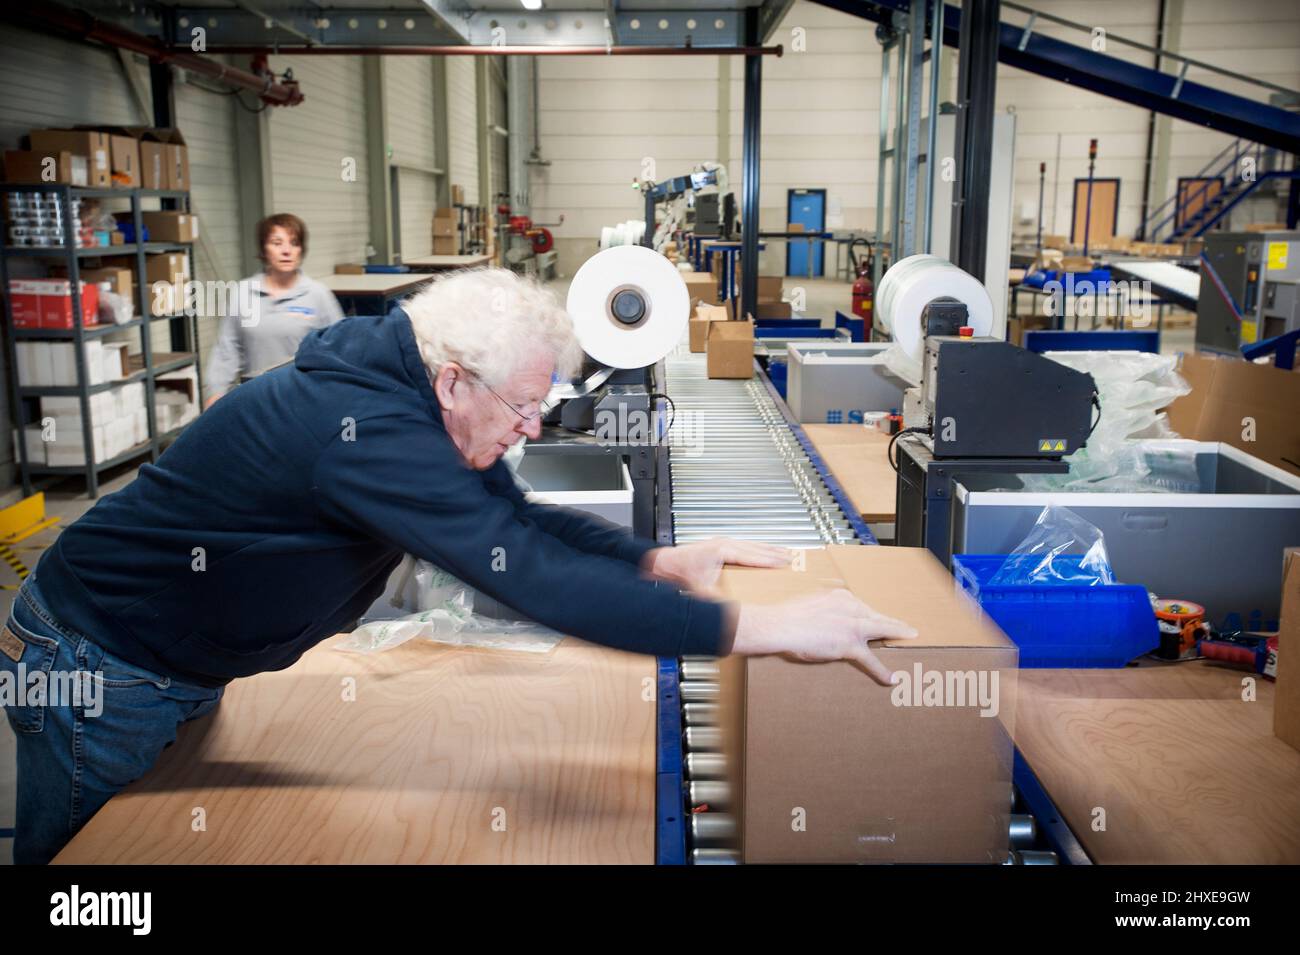 Man packaging a client order in a warehouse. Stock Photo